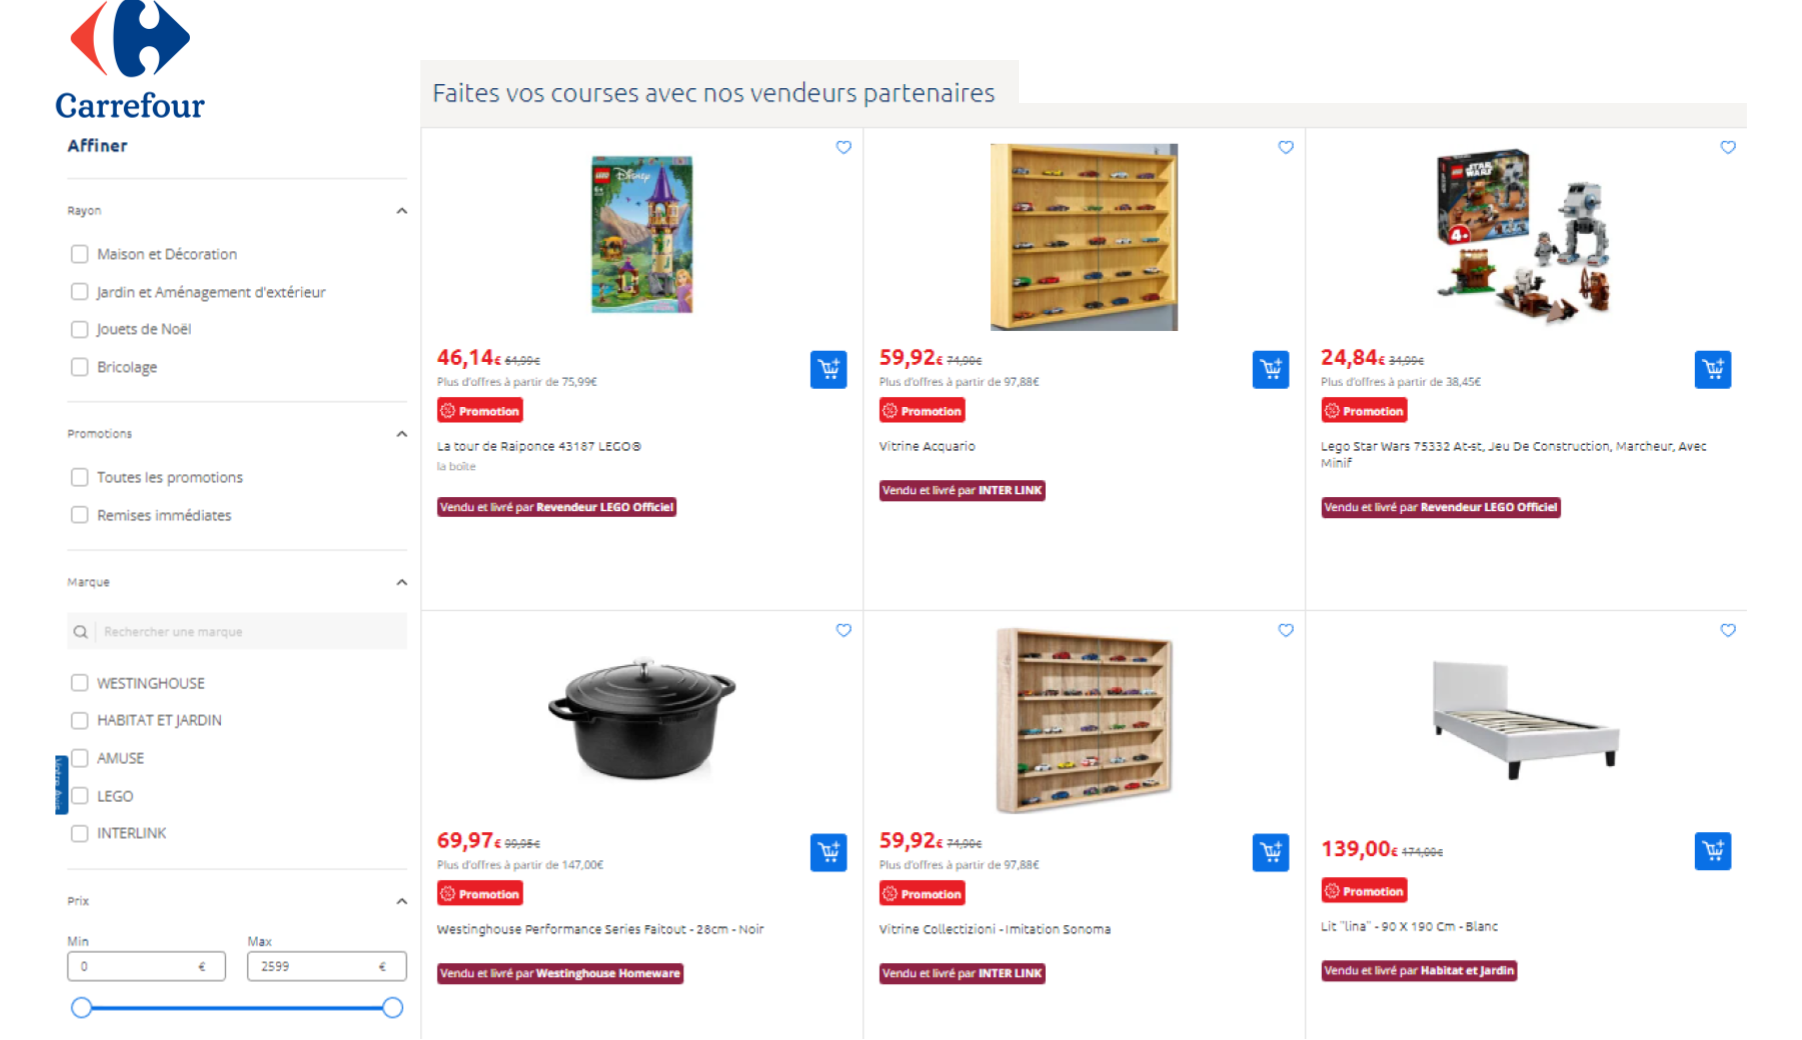 Carrefour.fr_display page.png